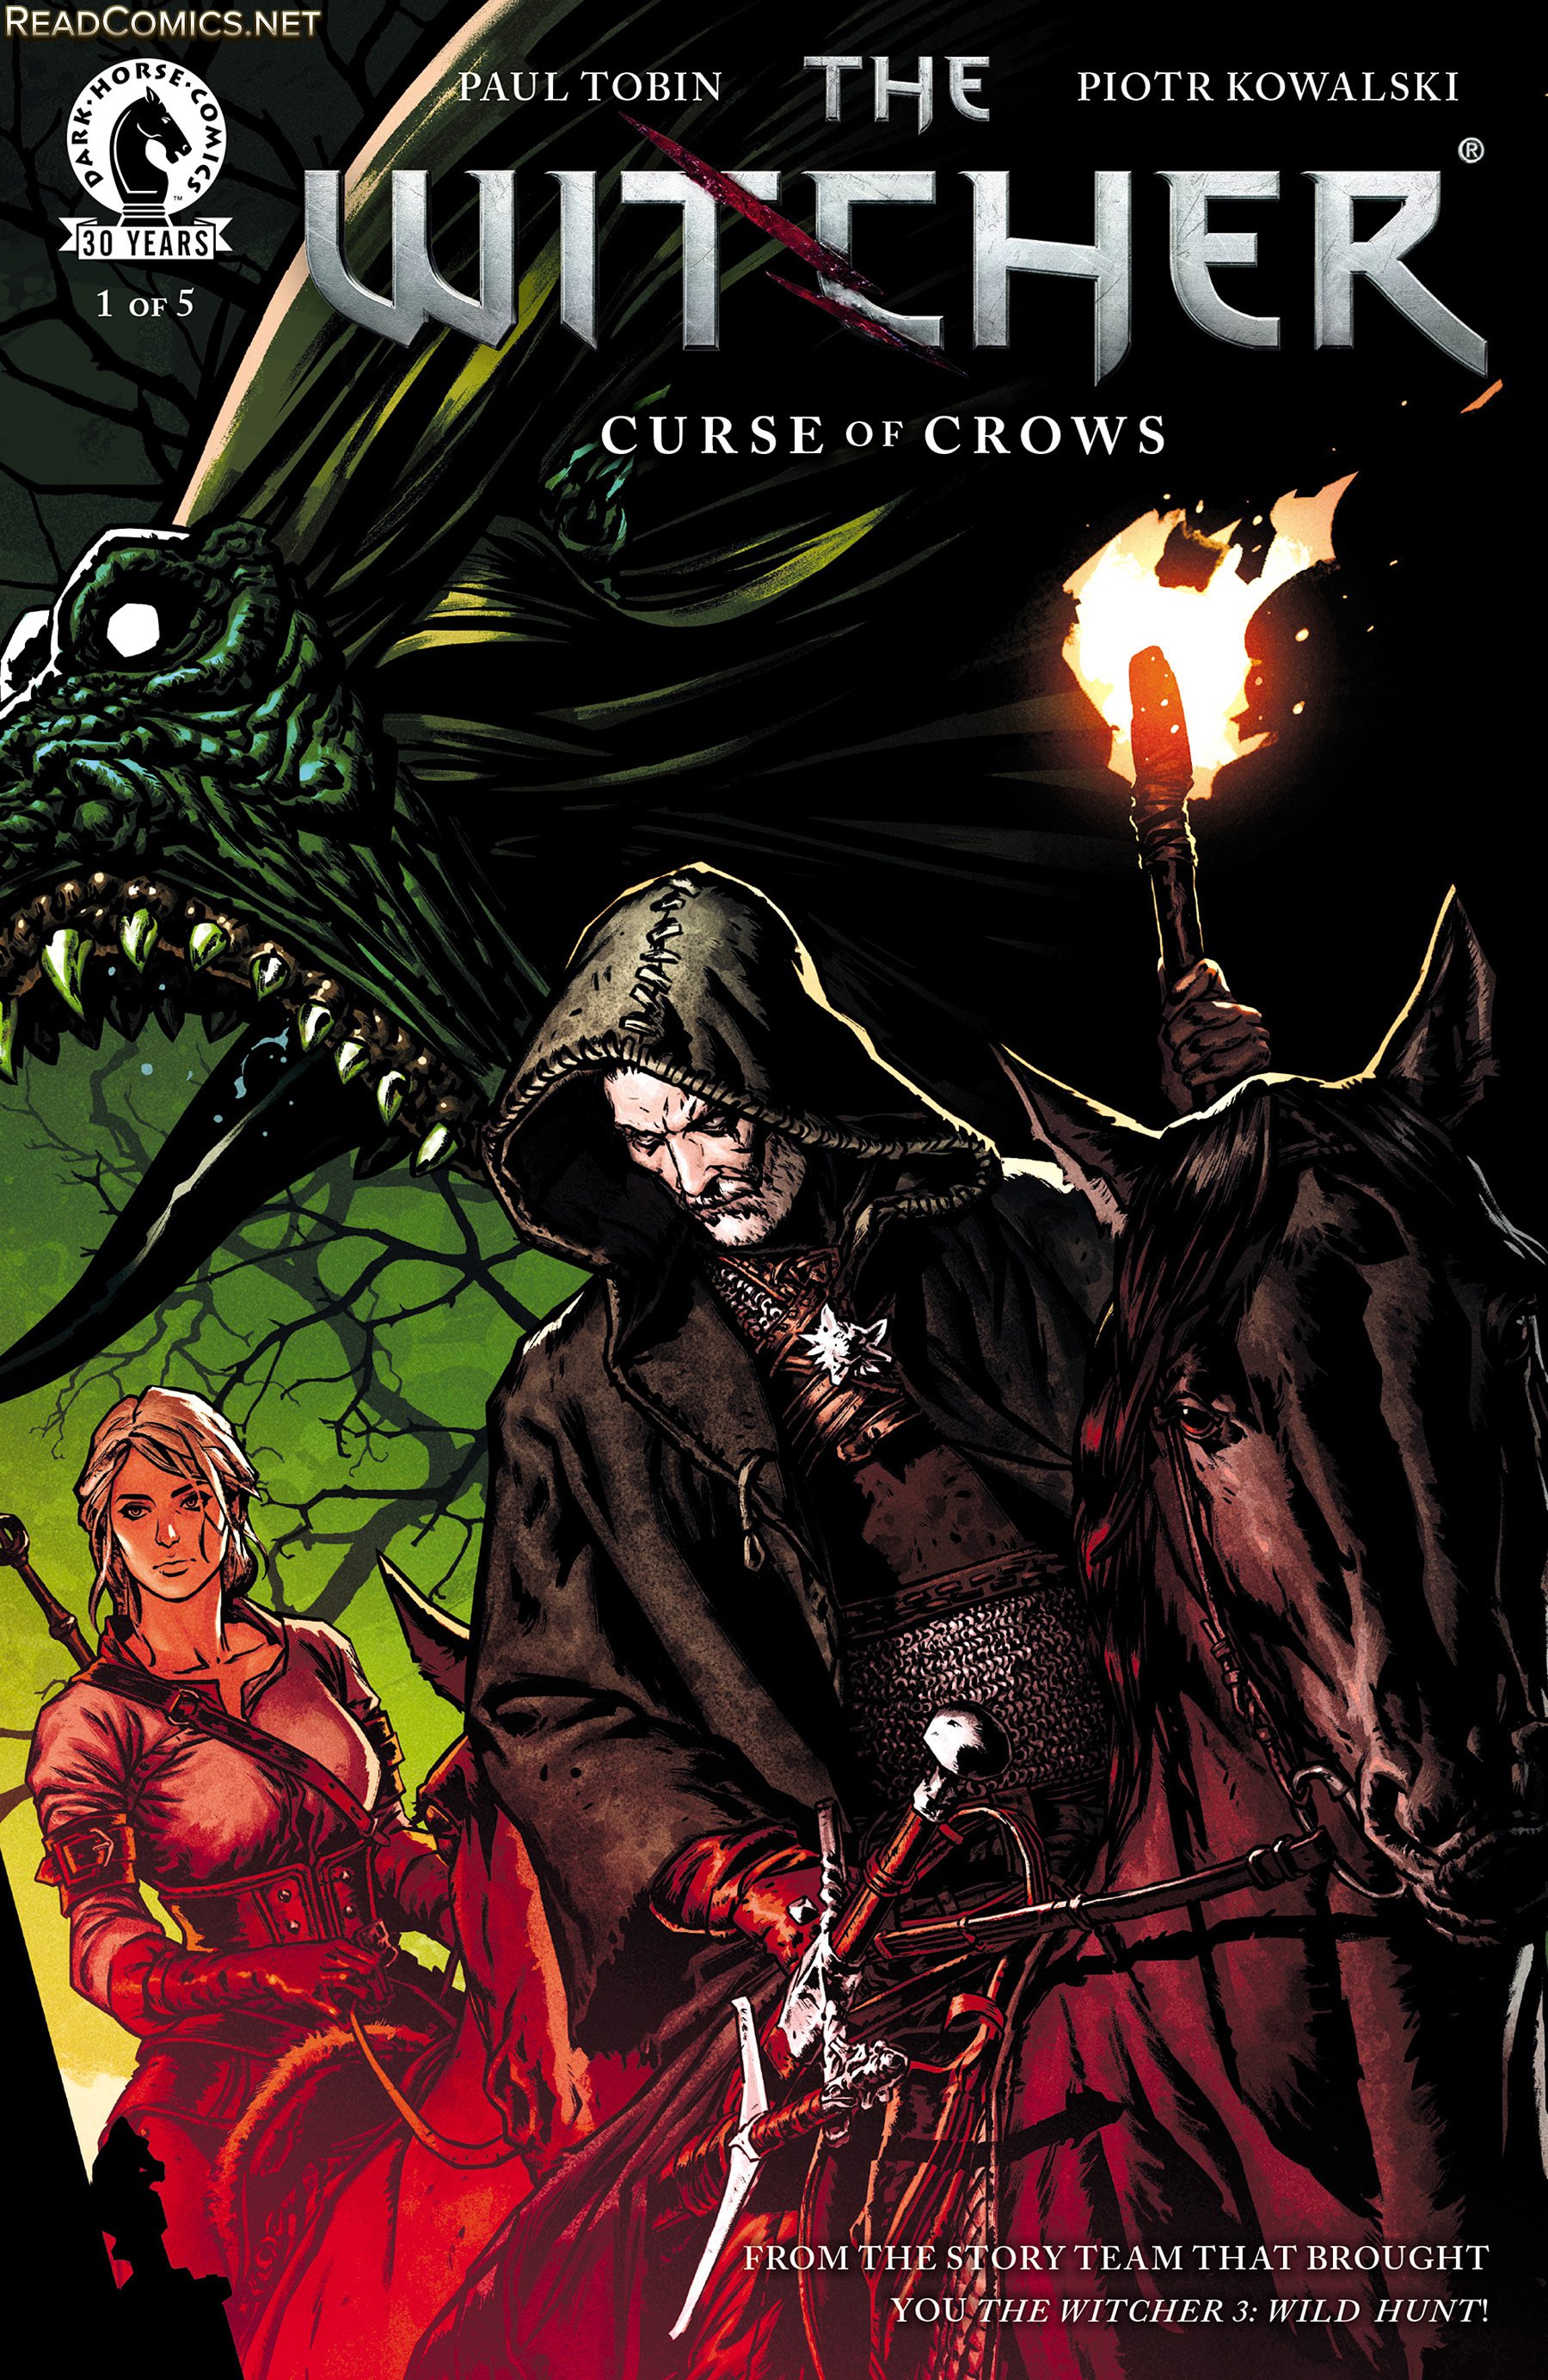 The Witcher Curse Of Crows Witcher Wiki Fandom Powered By Wikia